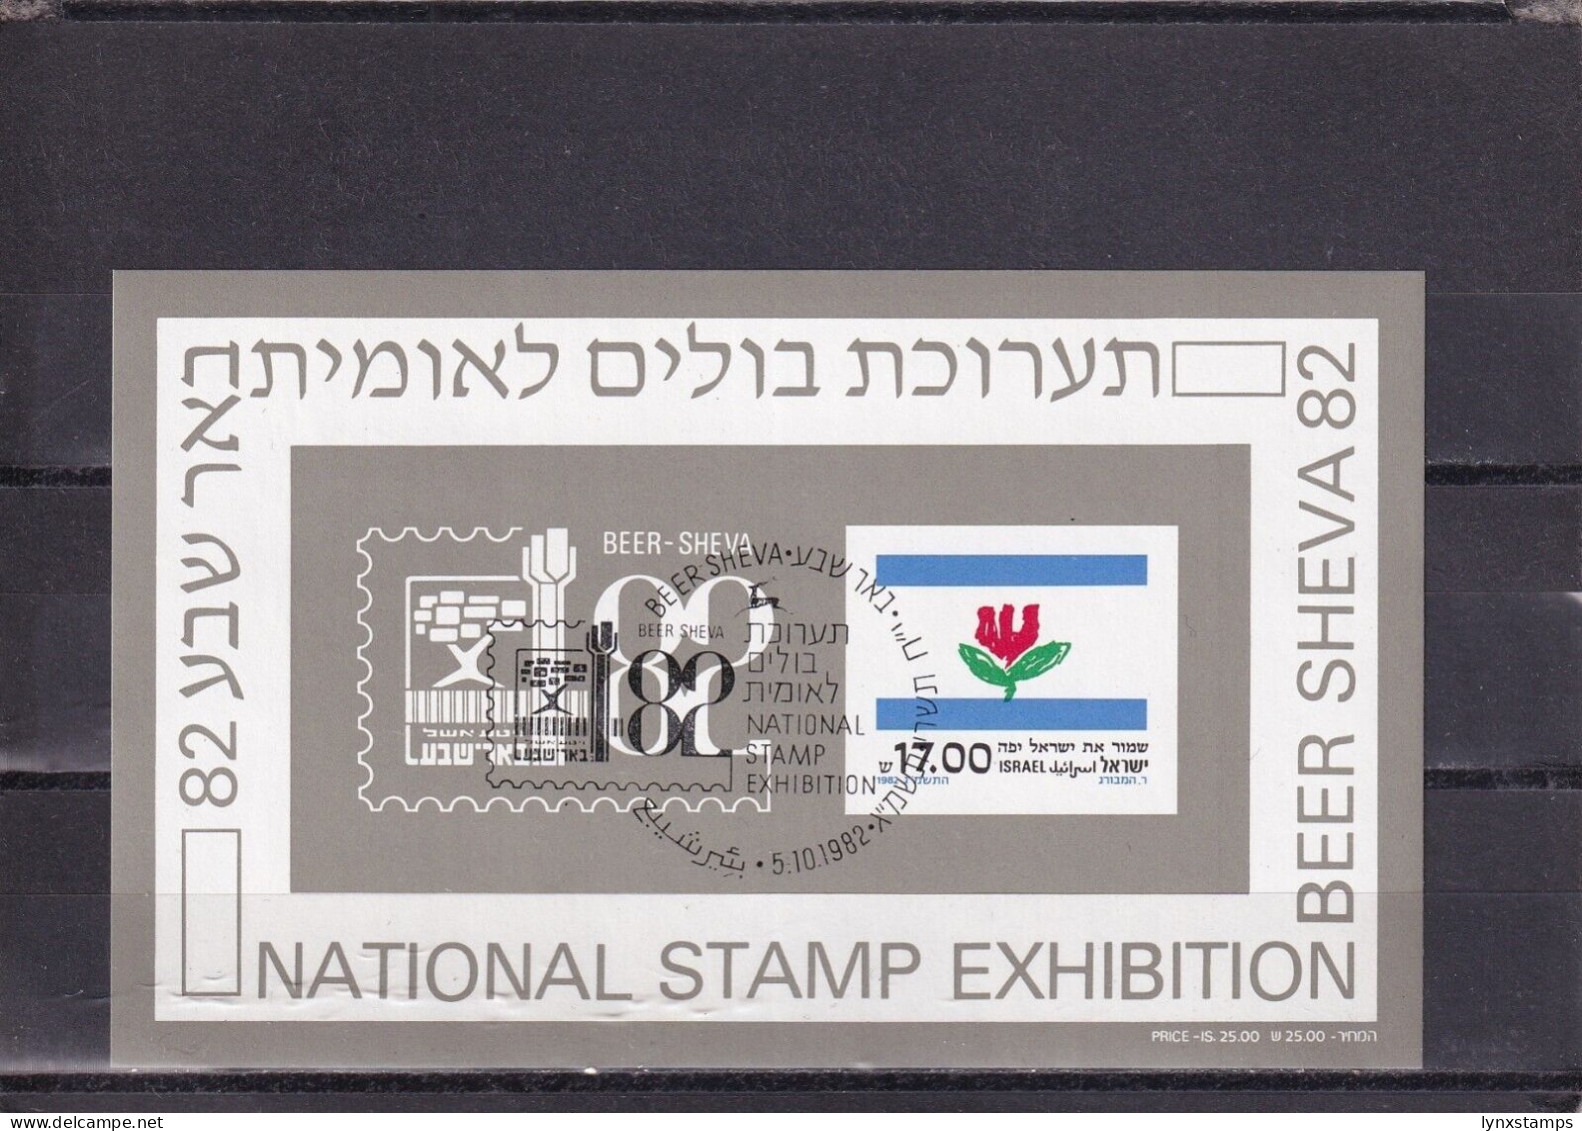 SA03 Israel 1982 National Stamp Ehibition Beer Sheva 82 Minisheet Imperf Used - Gebraucht (ohne Tabs)